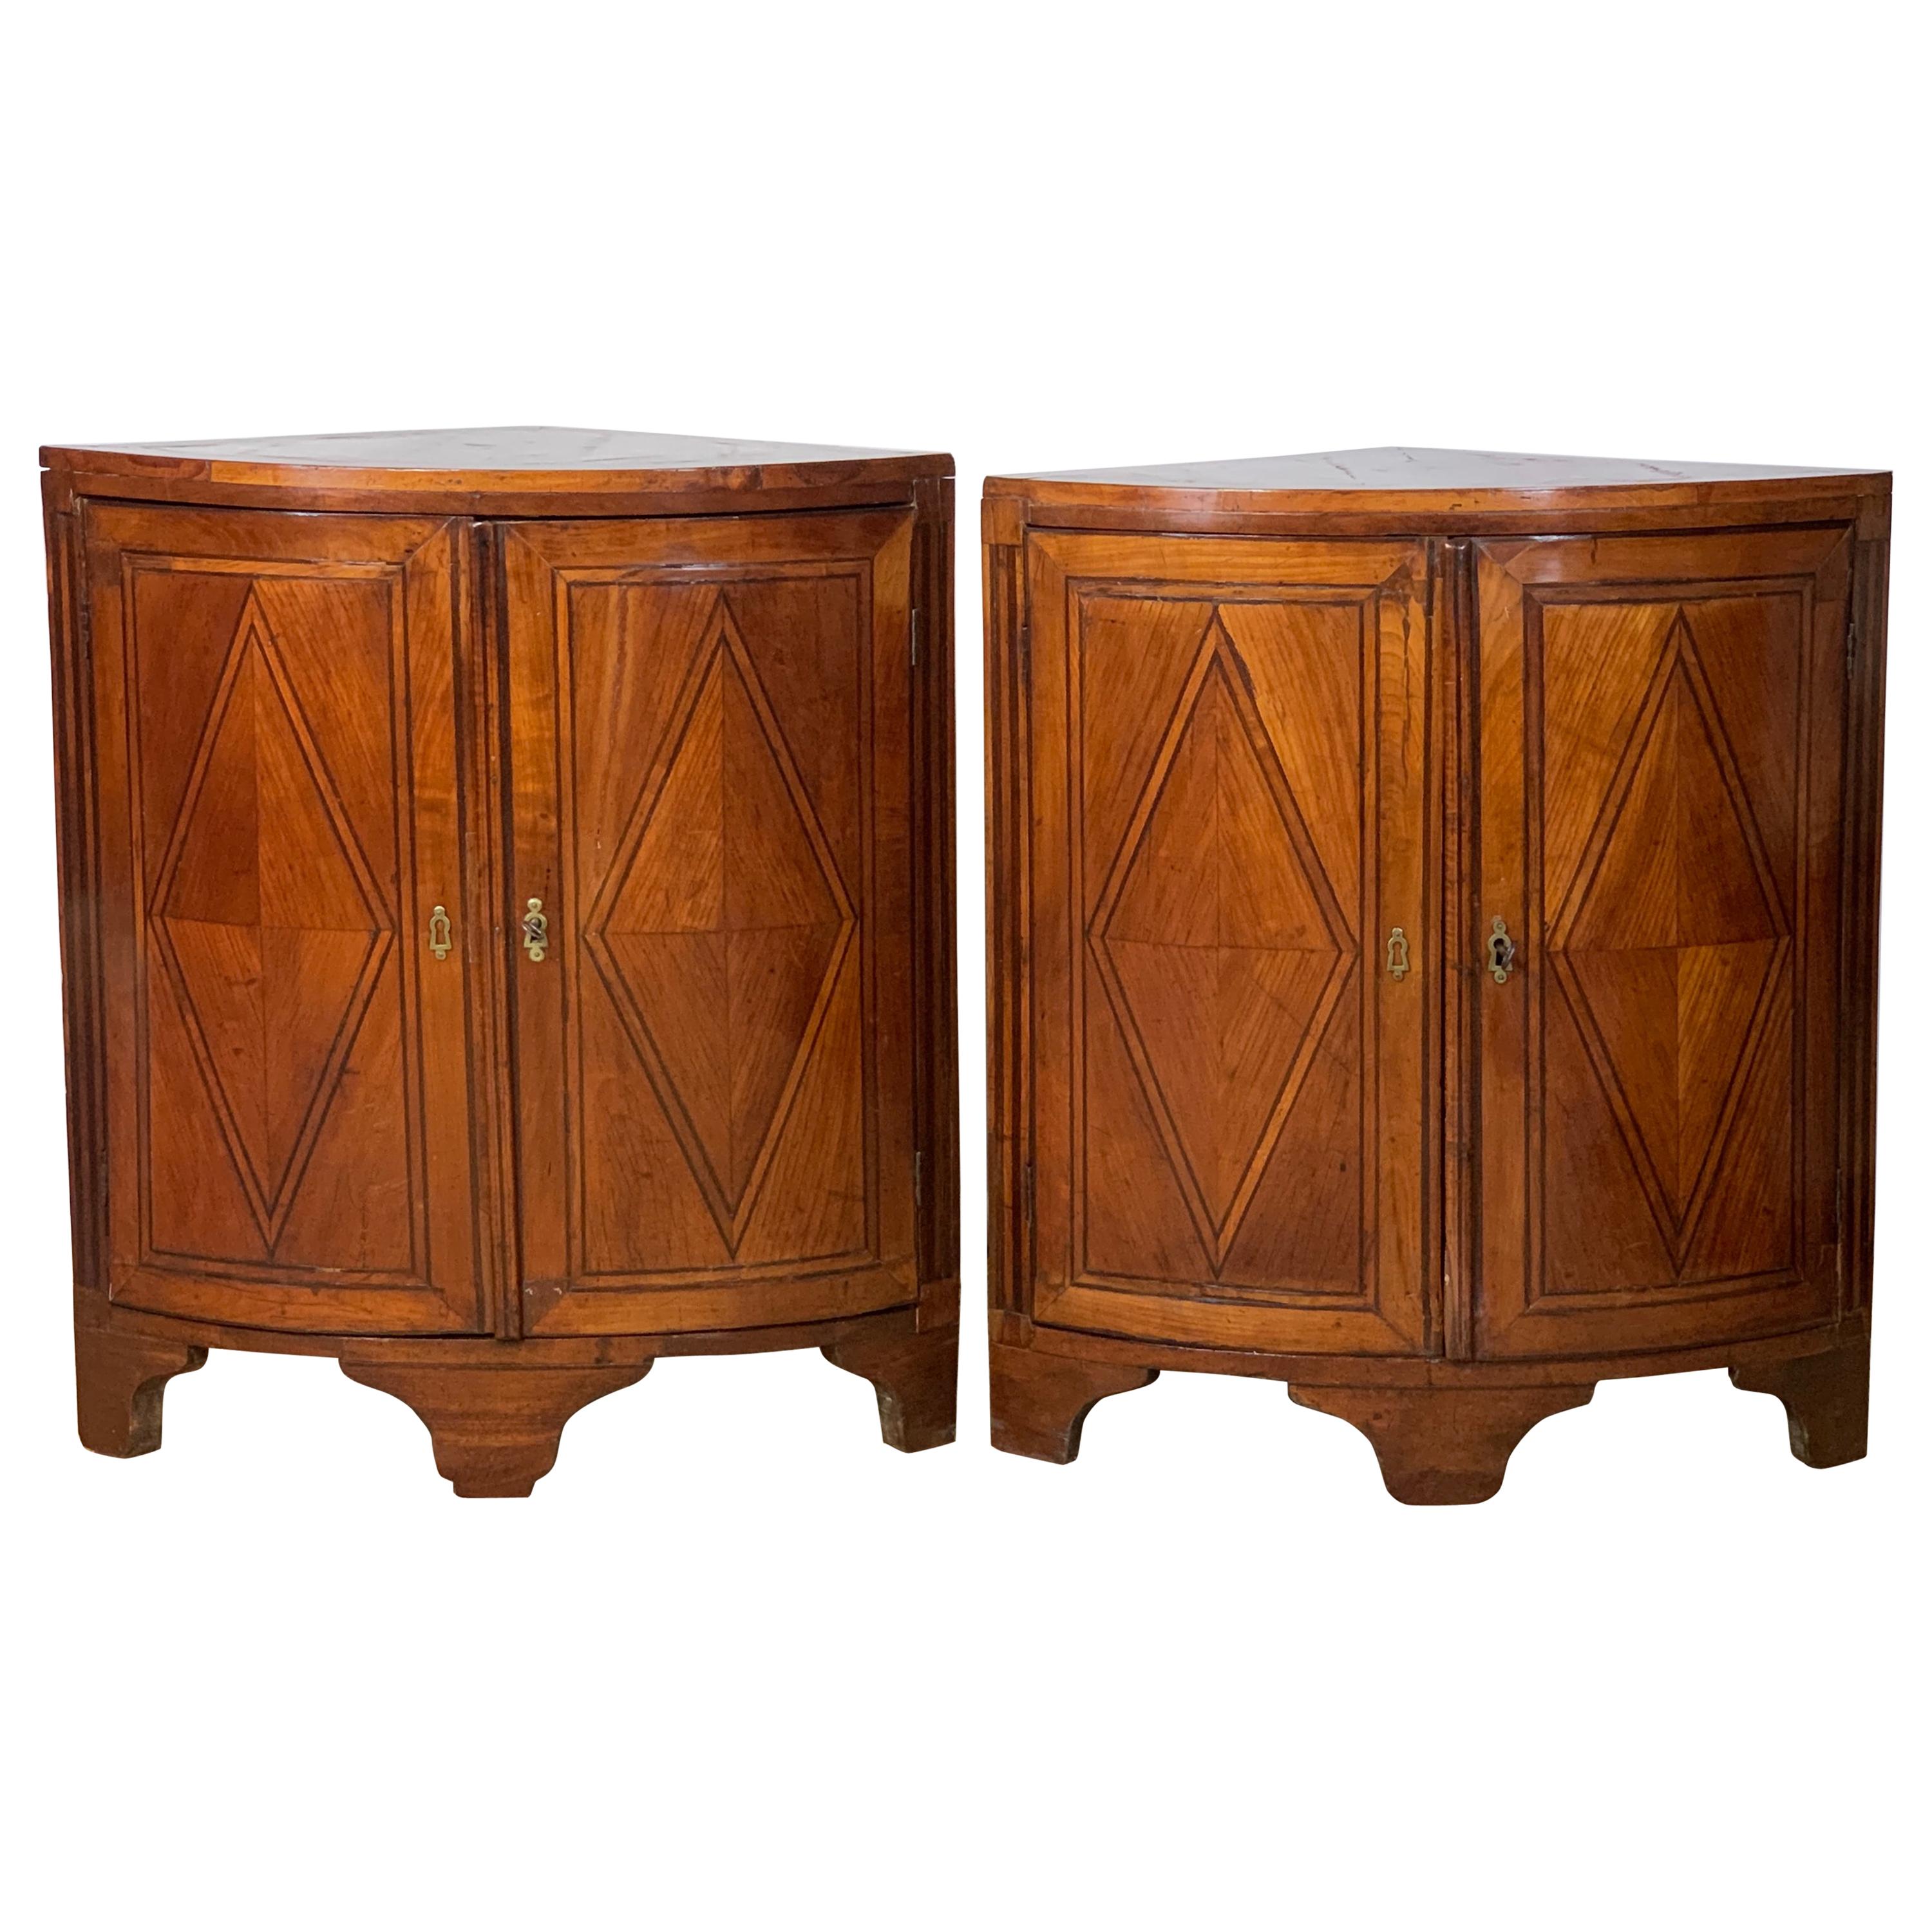 Pair of Late 18th Century French Encoigneurs 'Corner Cabinets'